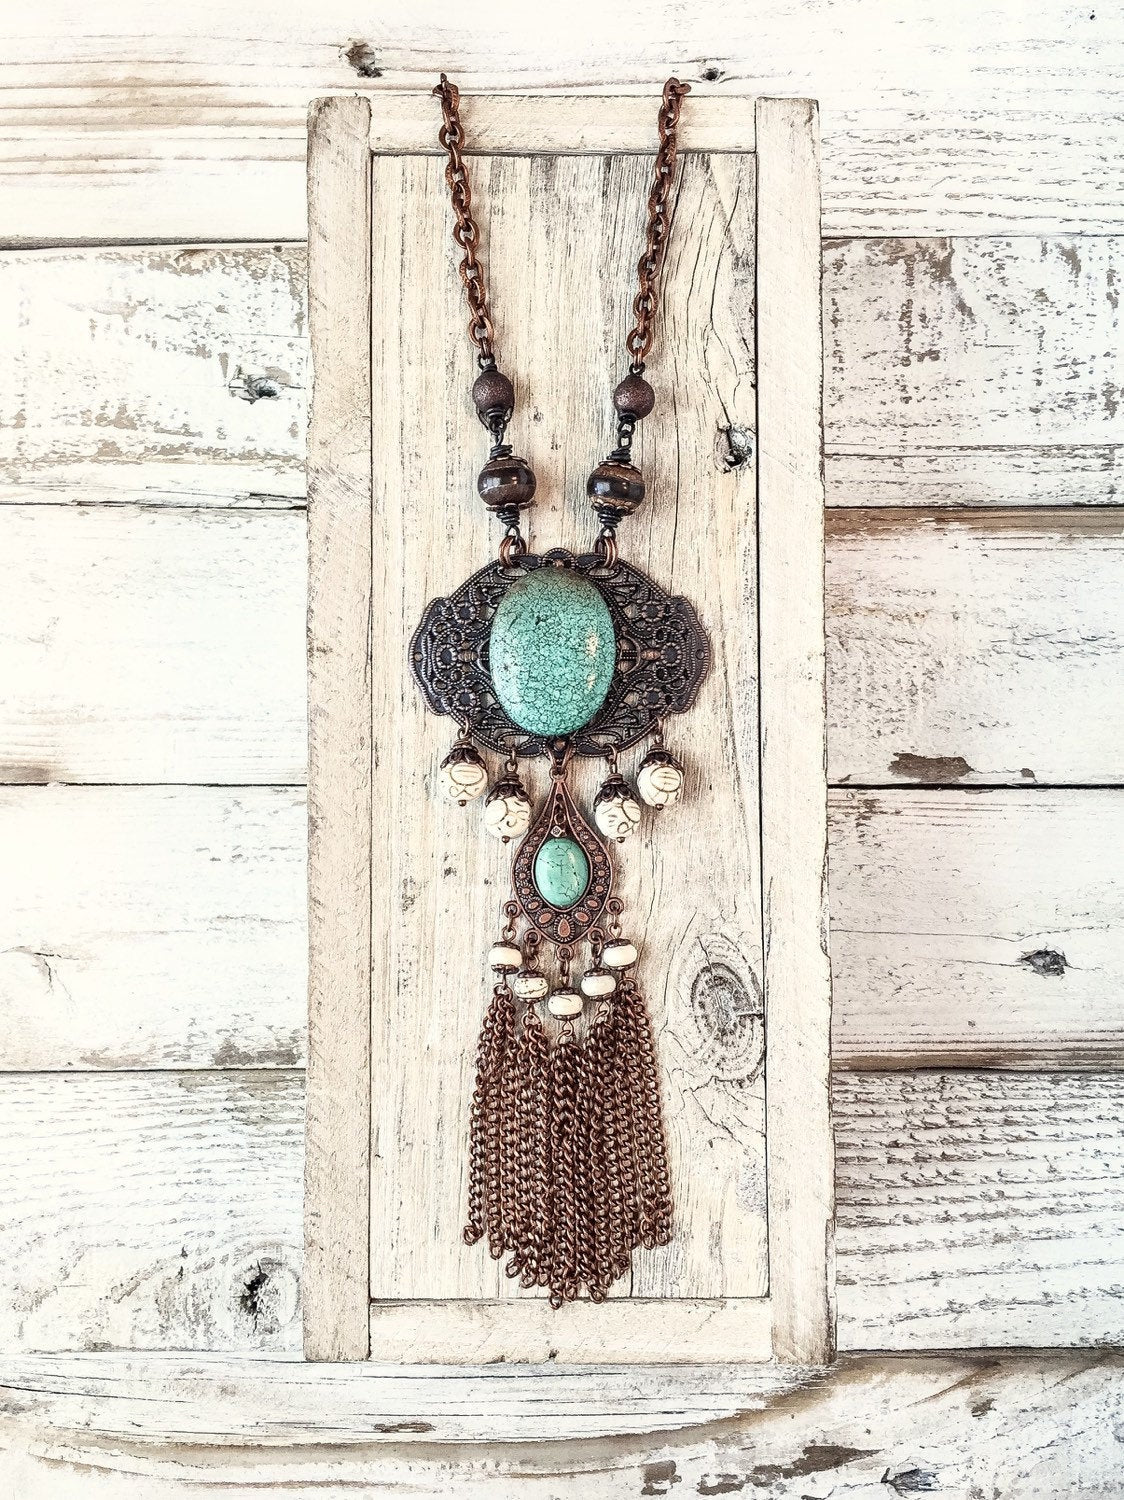 Turquoise Stone Necklace, Bohemian Statement Necklace, Gypsy Long Necklace, Rustic Style Necklace, Blue Filigree Necklace, N213.2